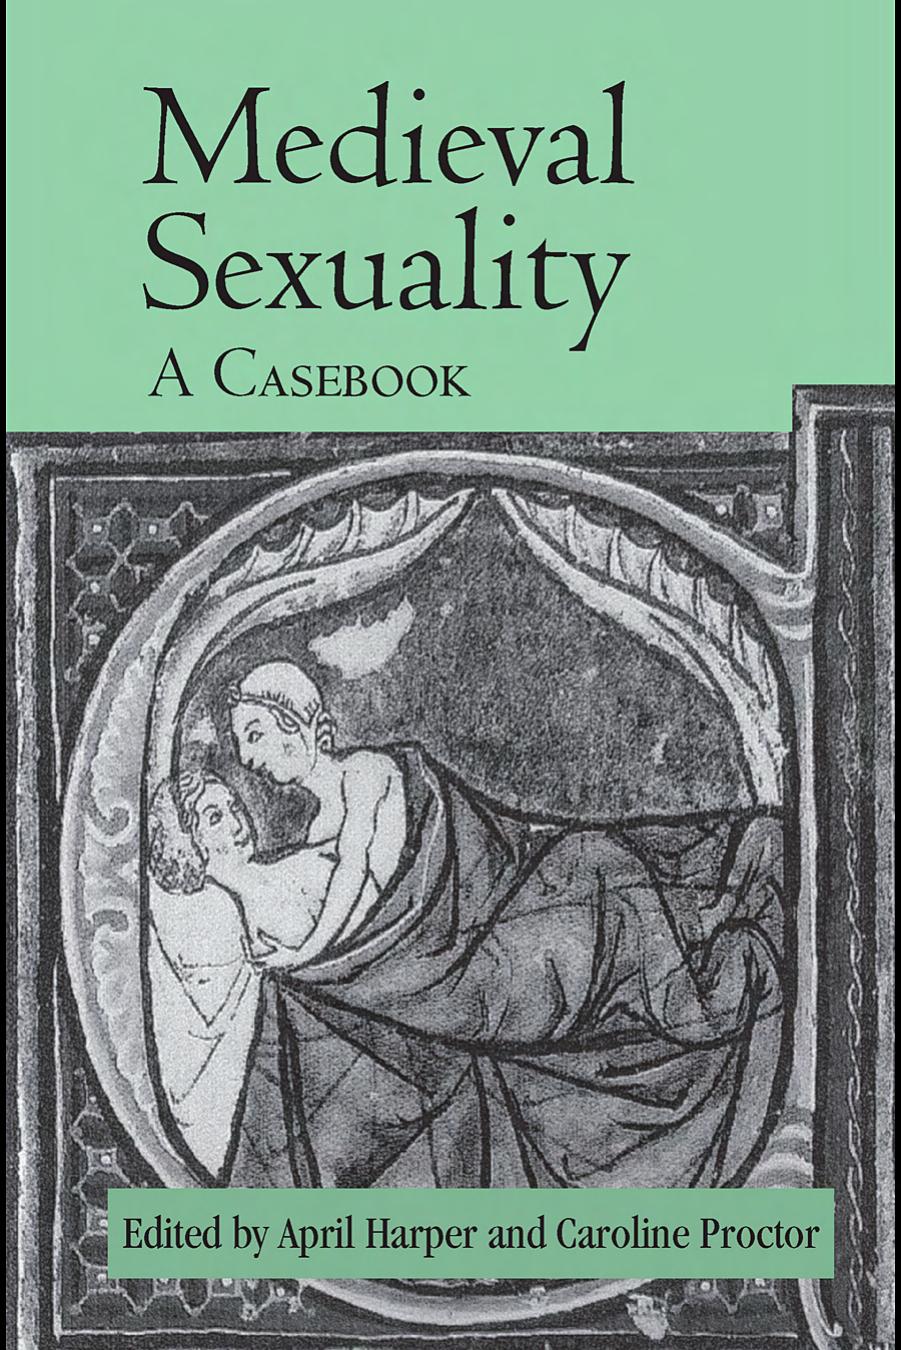 Medieval Sexuality: A Casebook